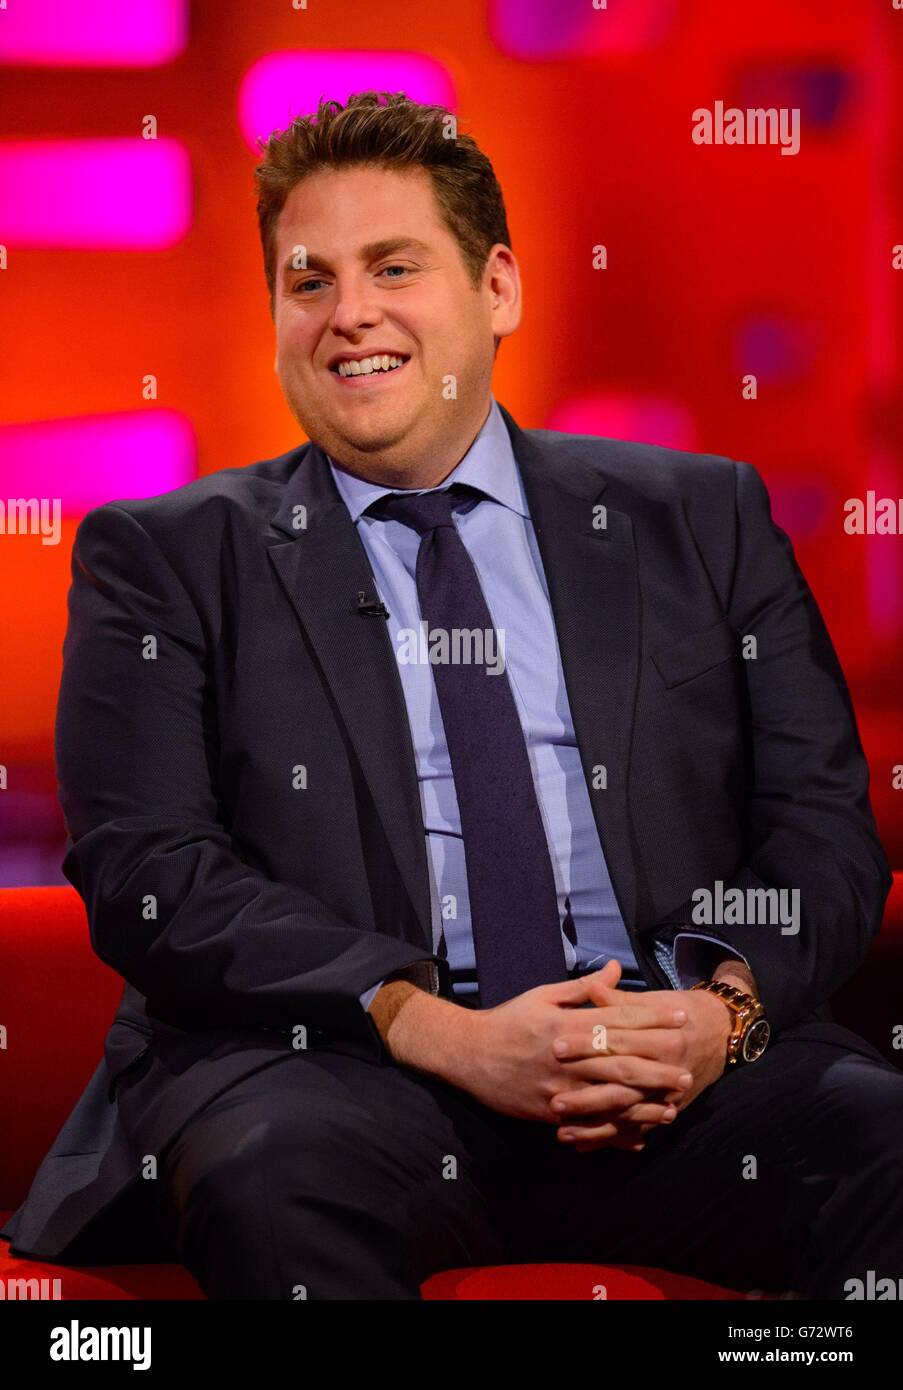 Jonah Hill during recording of the Graham Norton Show, at the London Studios, in central London. Stock Photo